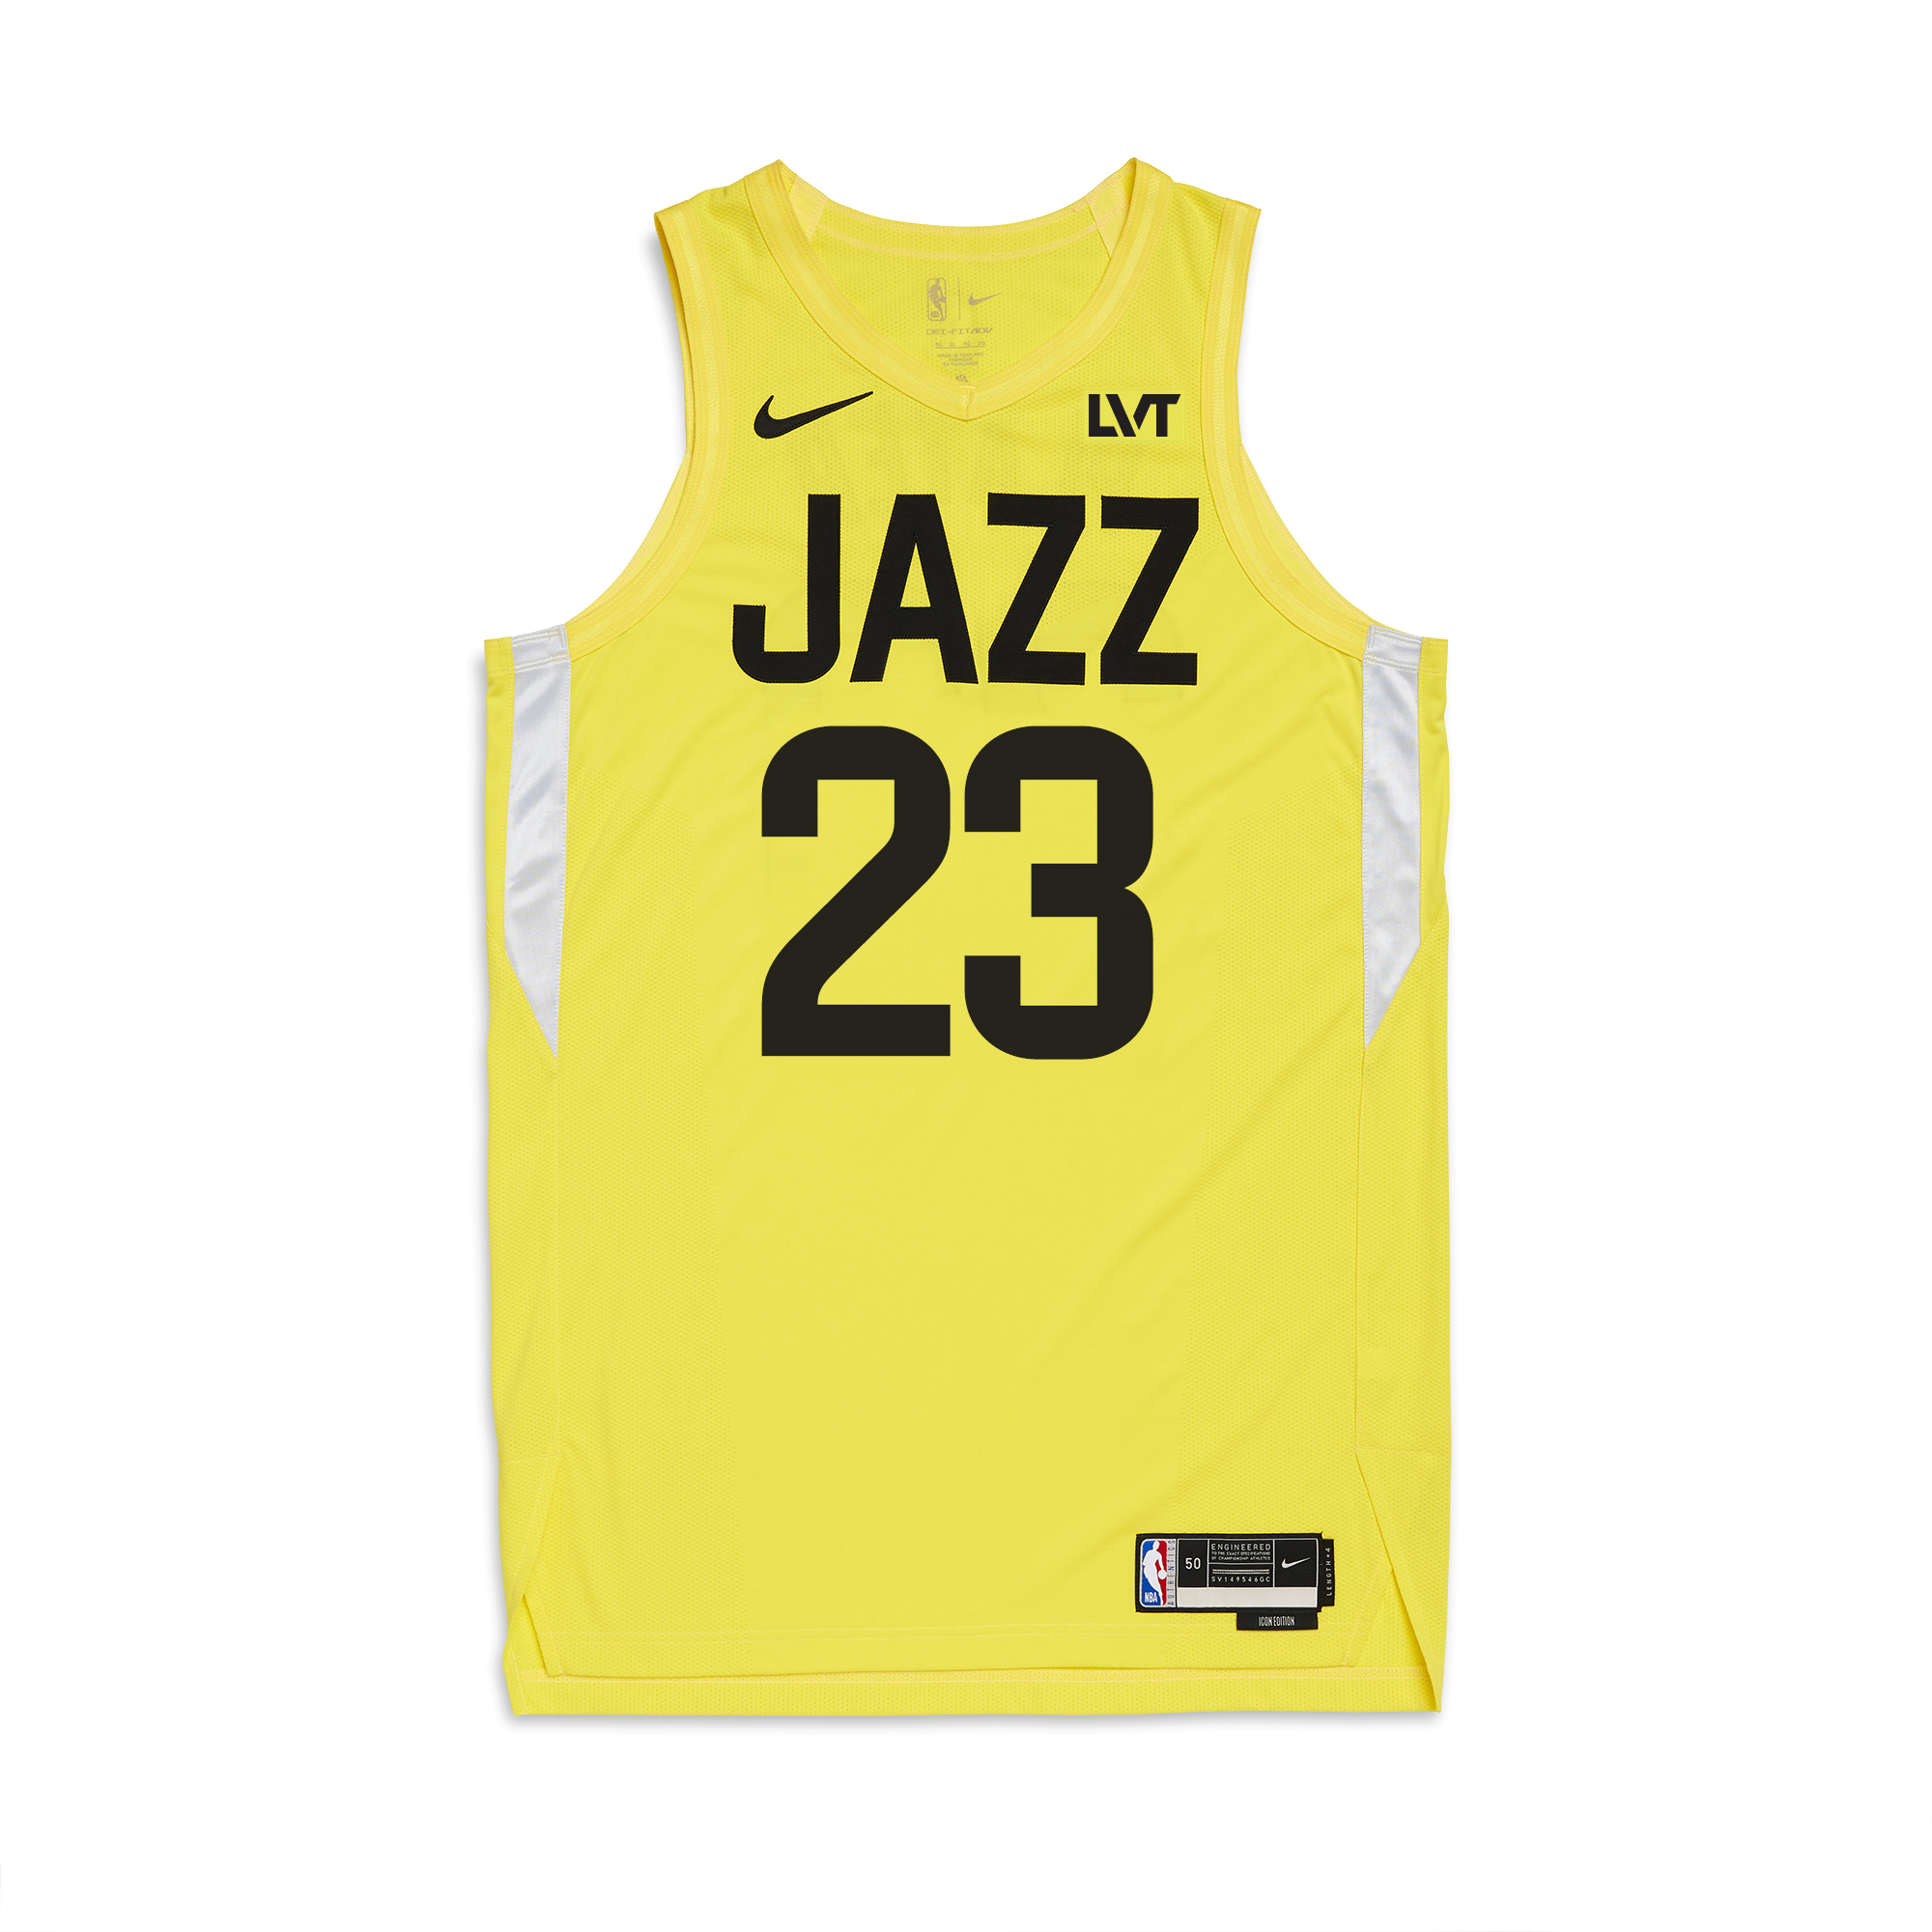 The leaked 2023-24 Lakers City Edition jerseys received a mixed